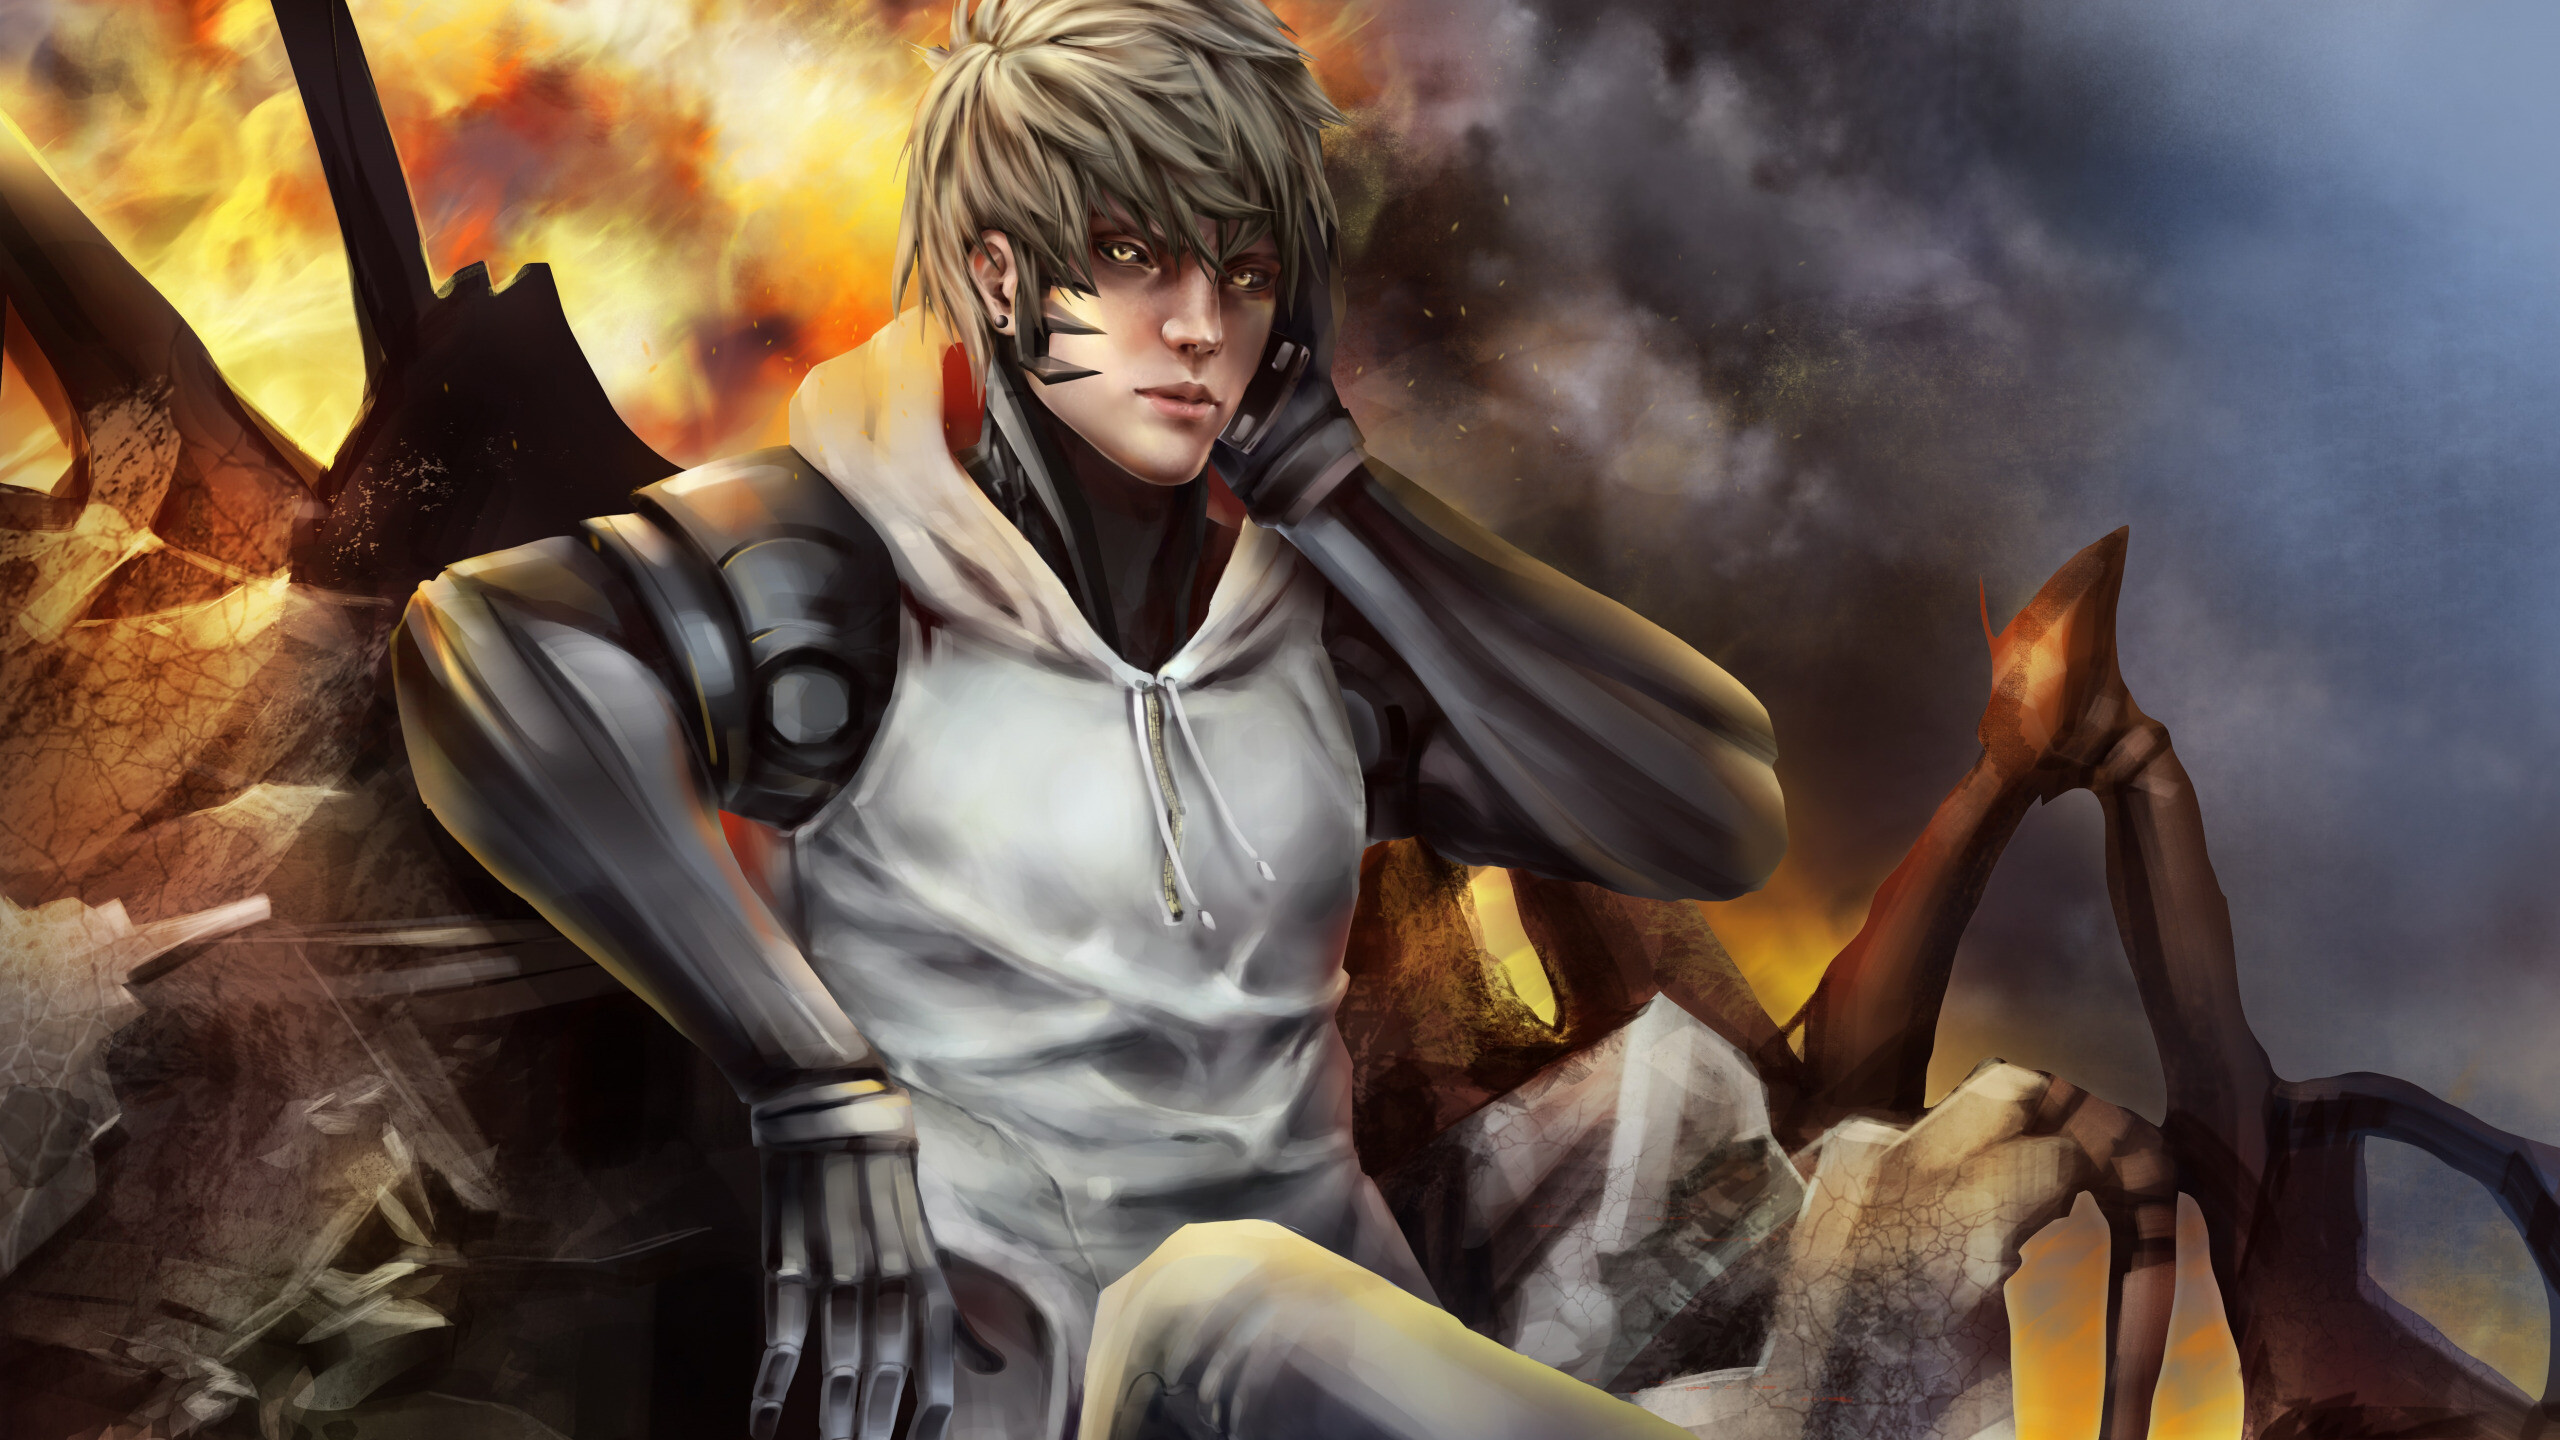 Genos: Anime guy, Cyborg, One Punch Man, Demon Cyborg's tears are made of oil. 2560x1440 HD Background.